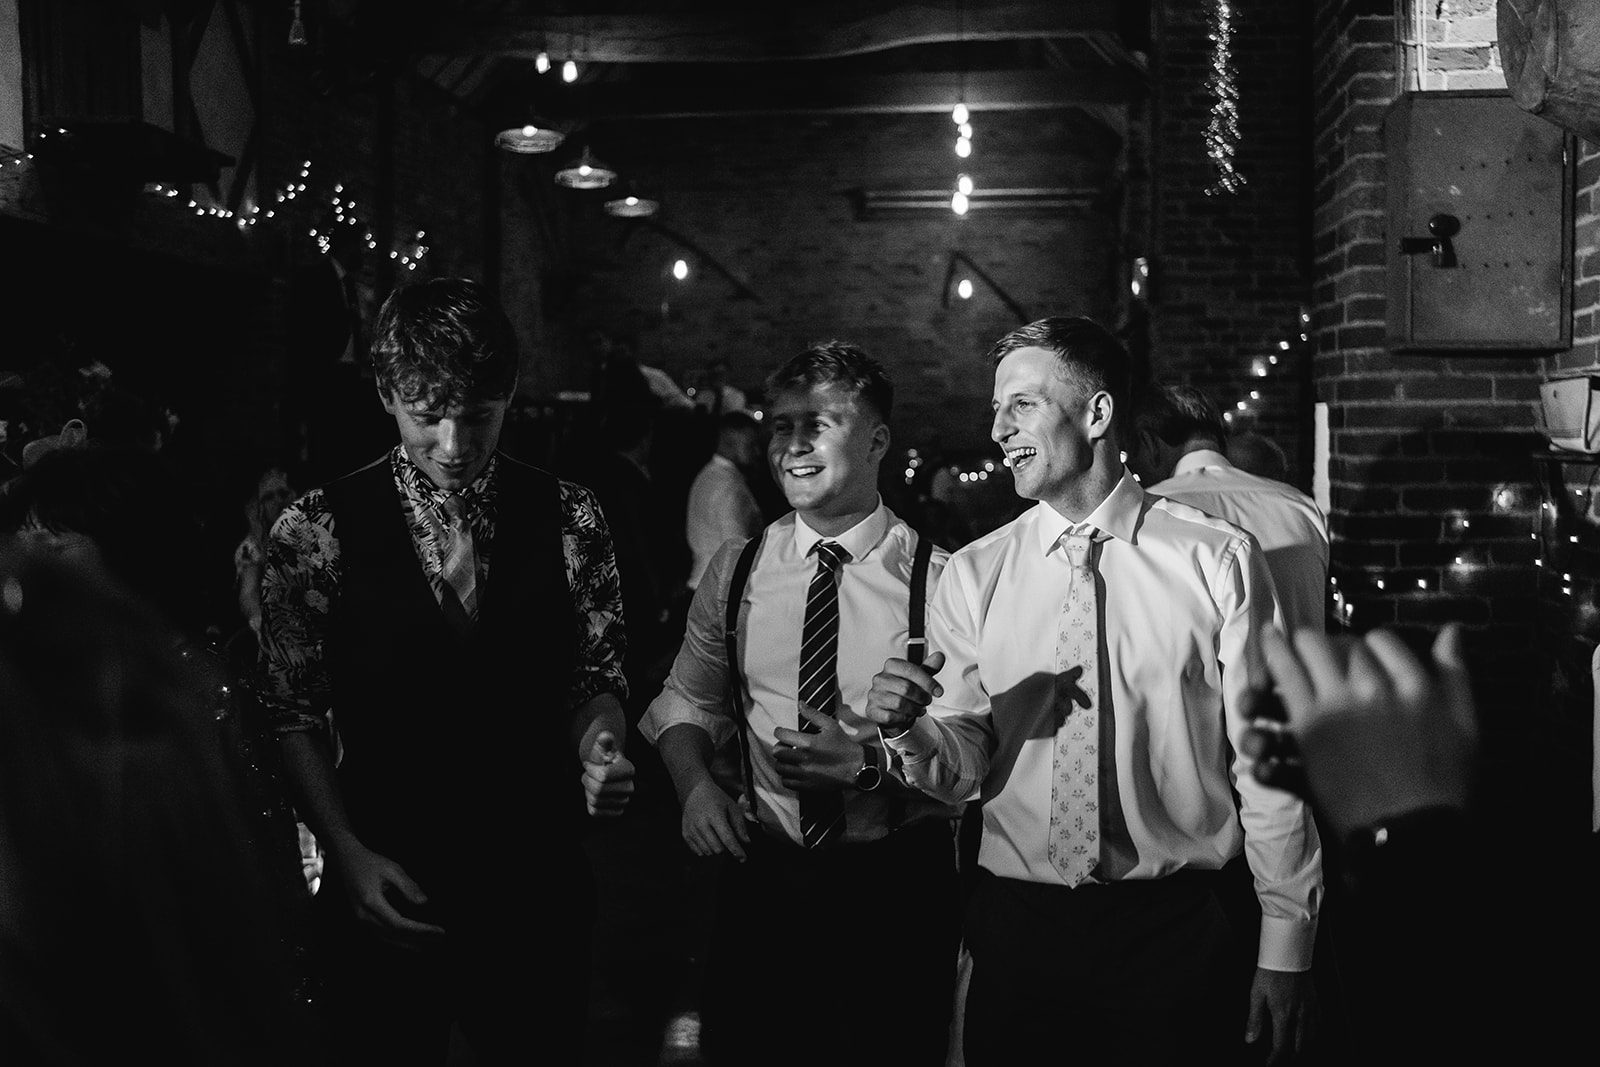 Wedding guests enjoying a band and singing, black and white - taken at Donnington Park Farmhouse